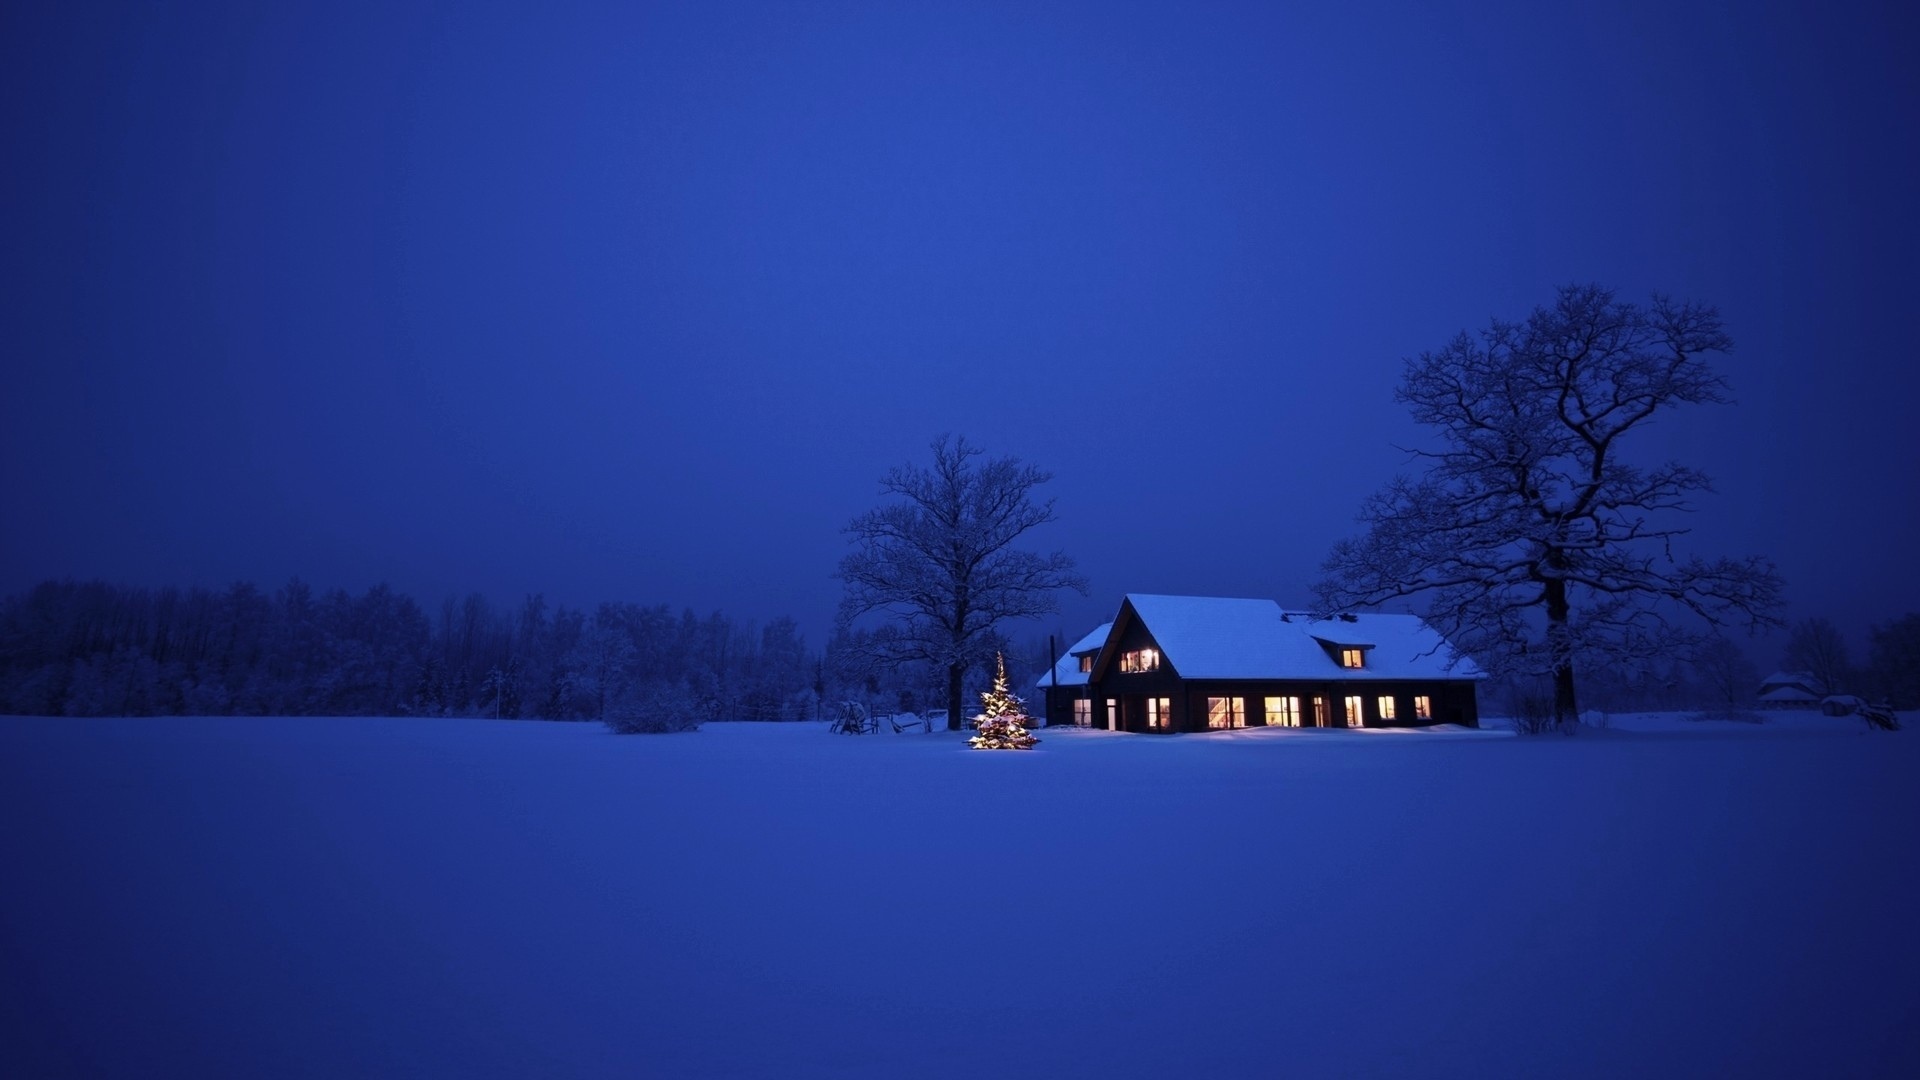 snow, houses, christmas xmas, new year, landscape, holidays, winter, blue cellphone